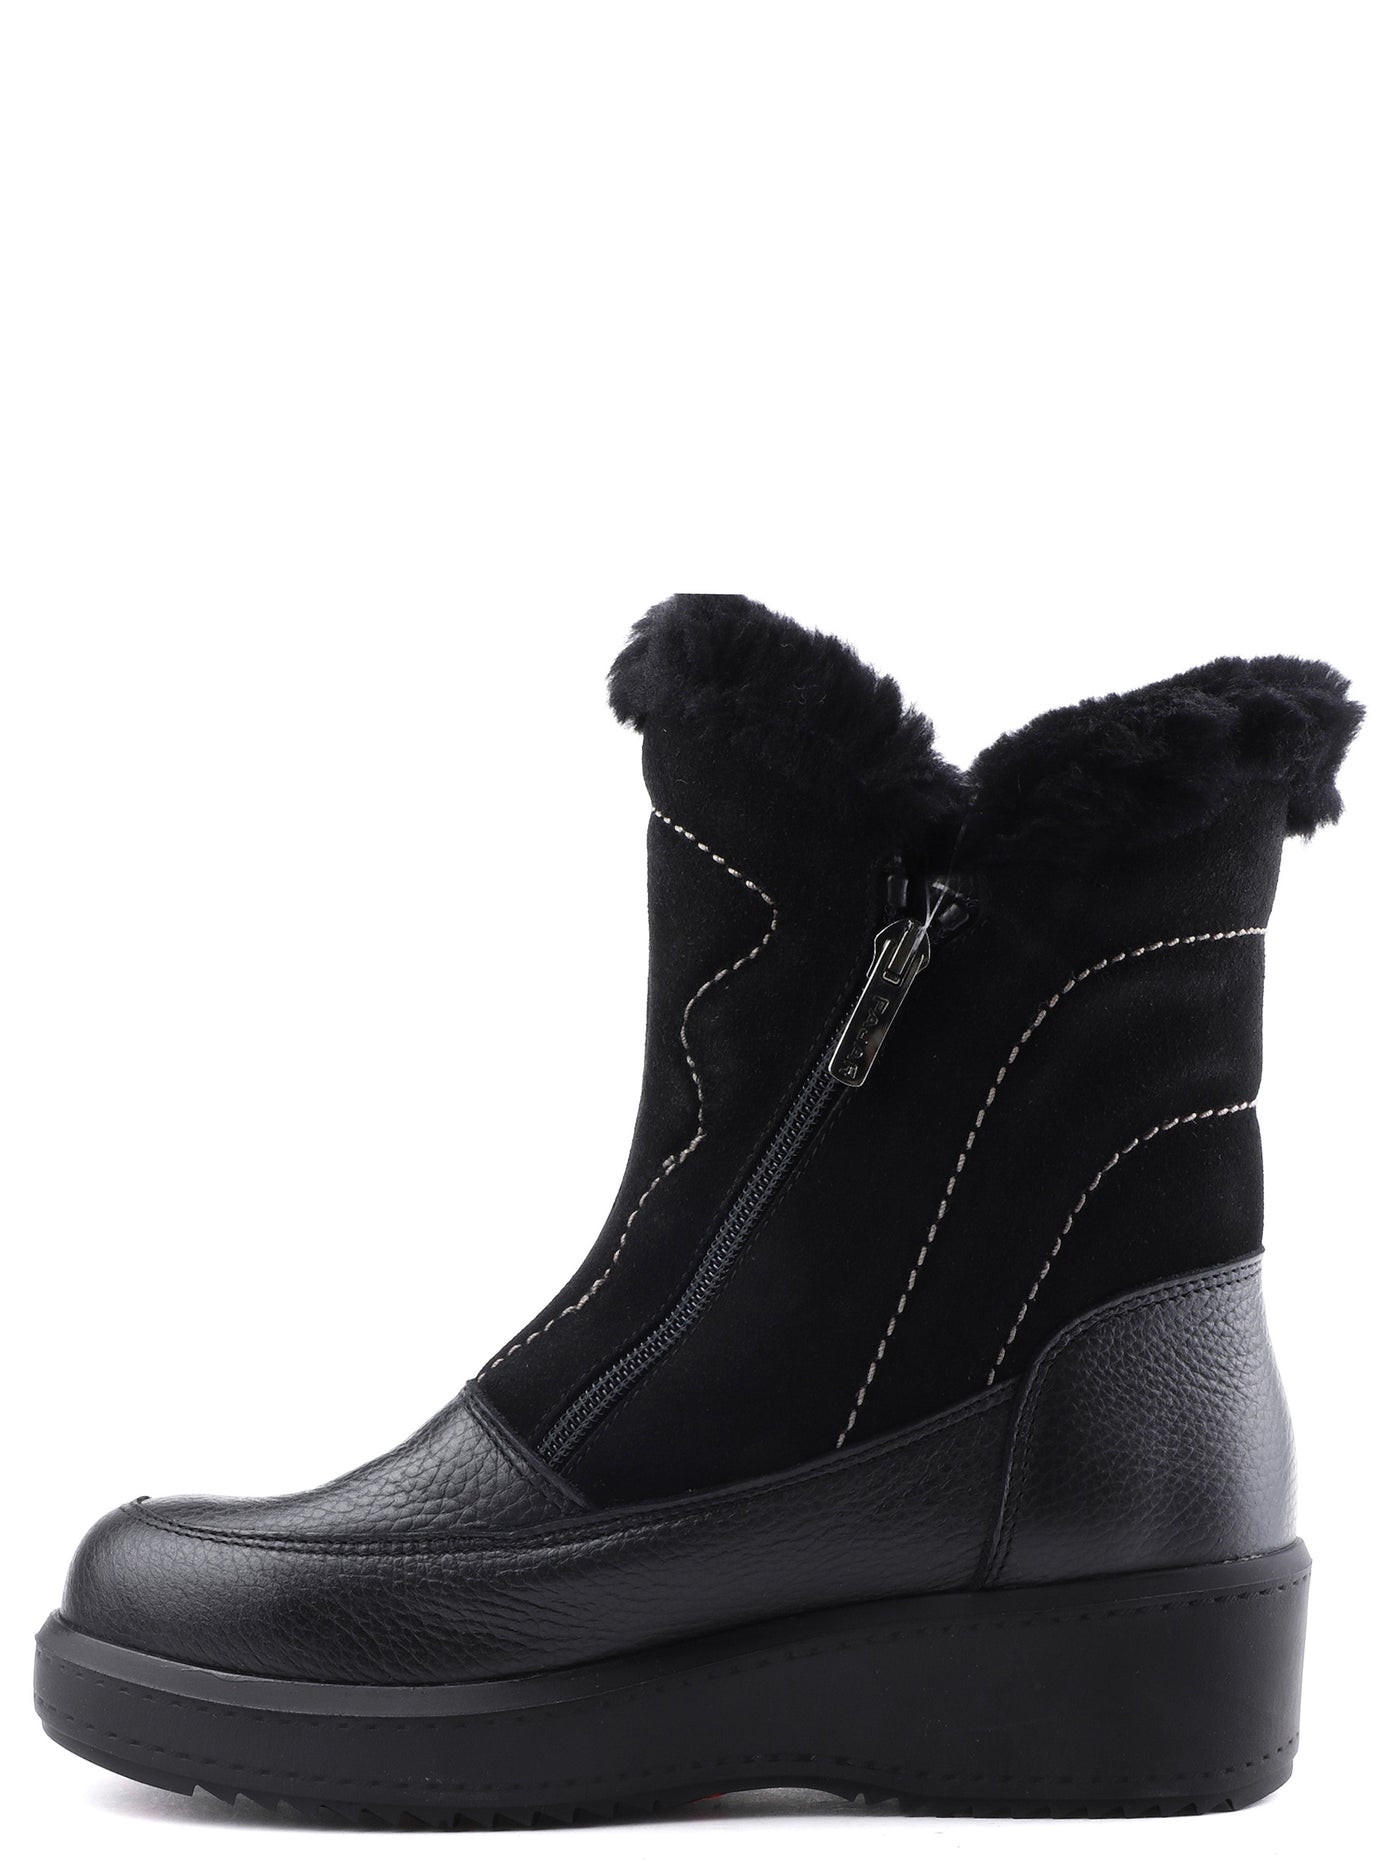 Mia A Women's Heritage Boot w/ Ice Grippers